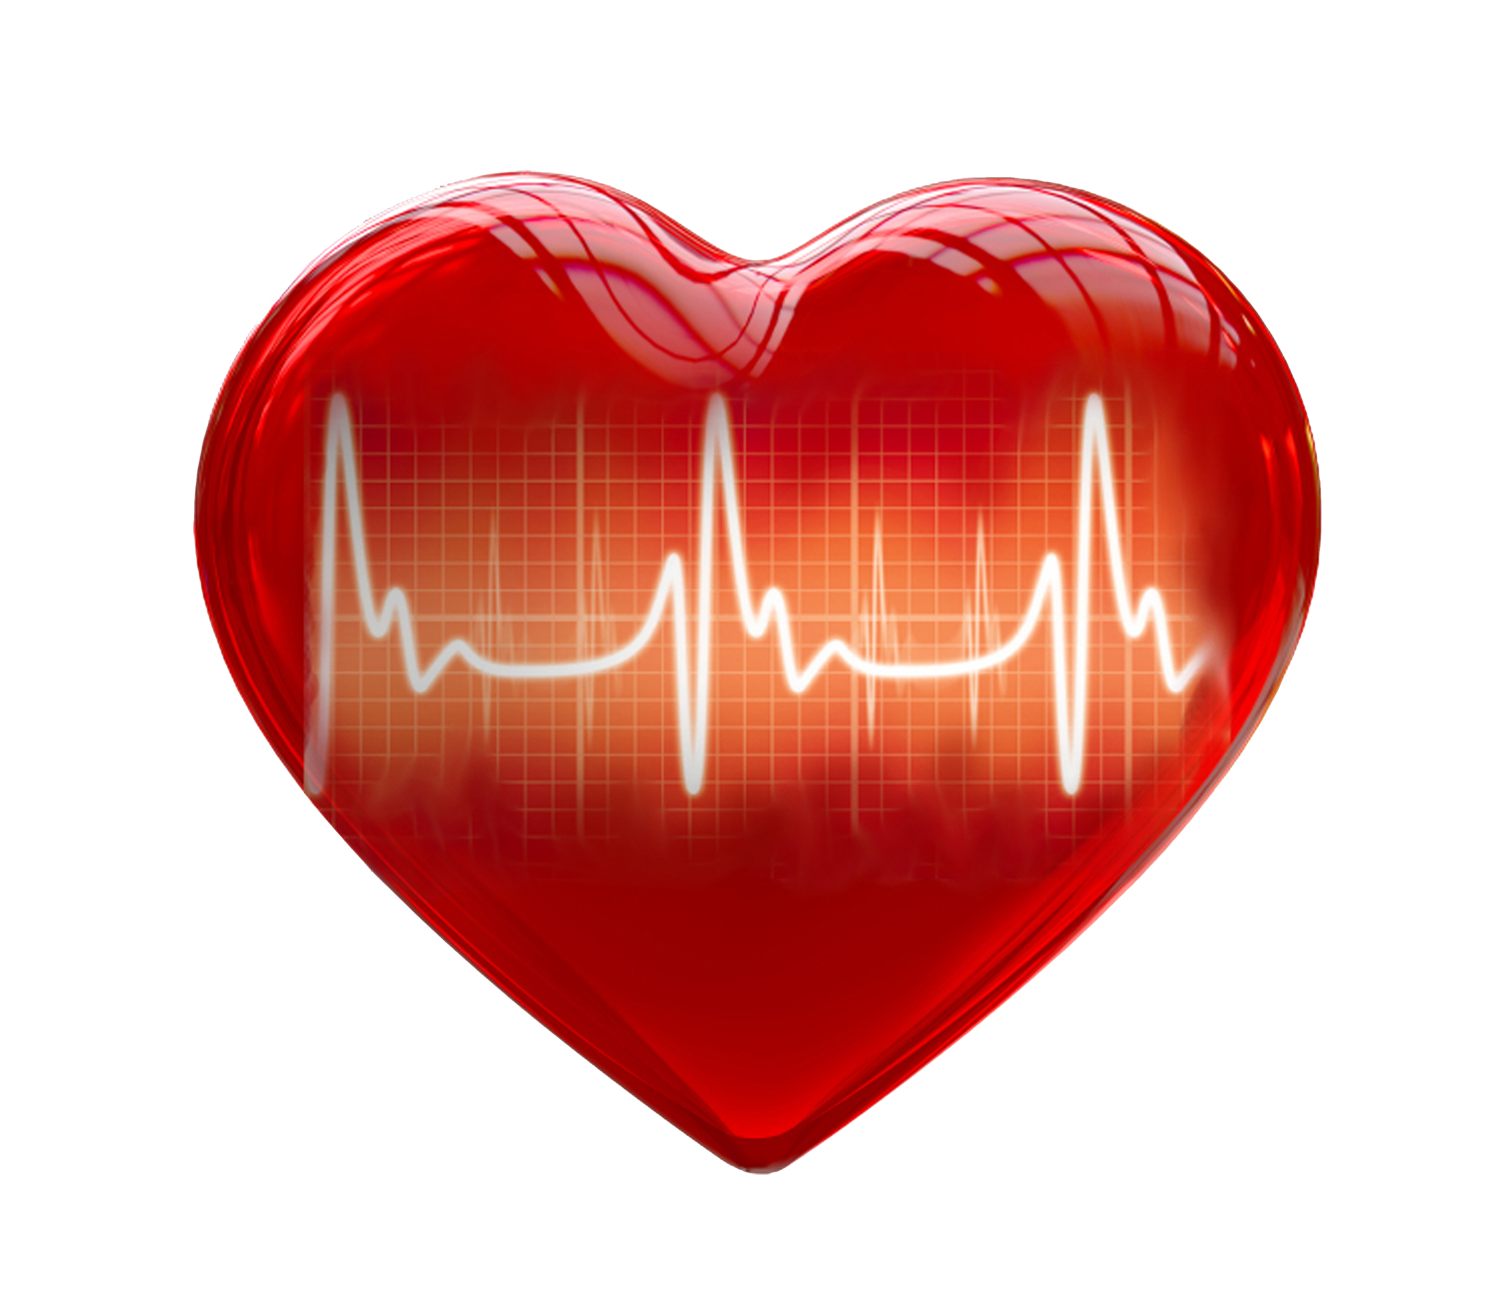 Disease clipart unhealthy heart. Take care of your